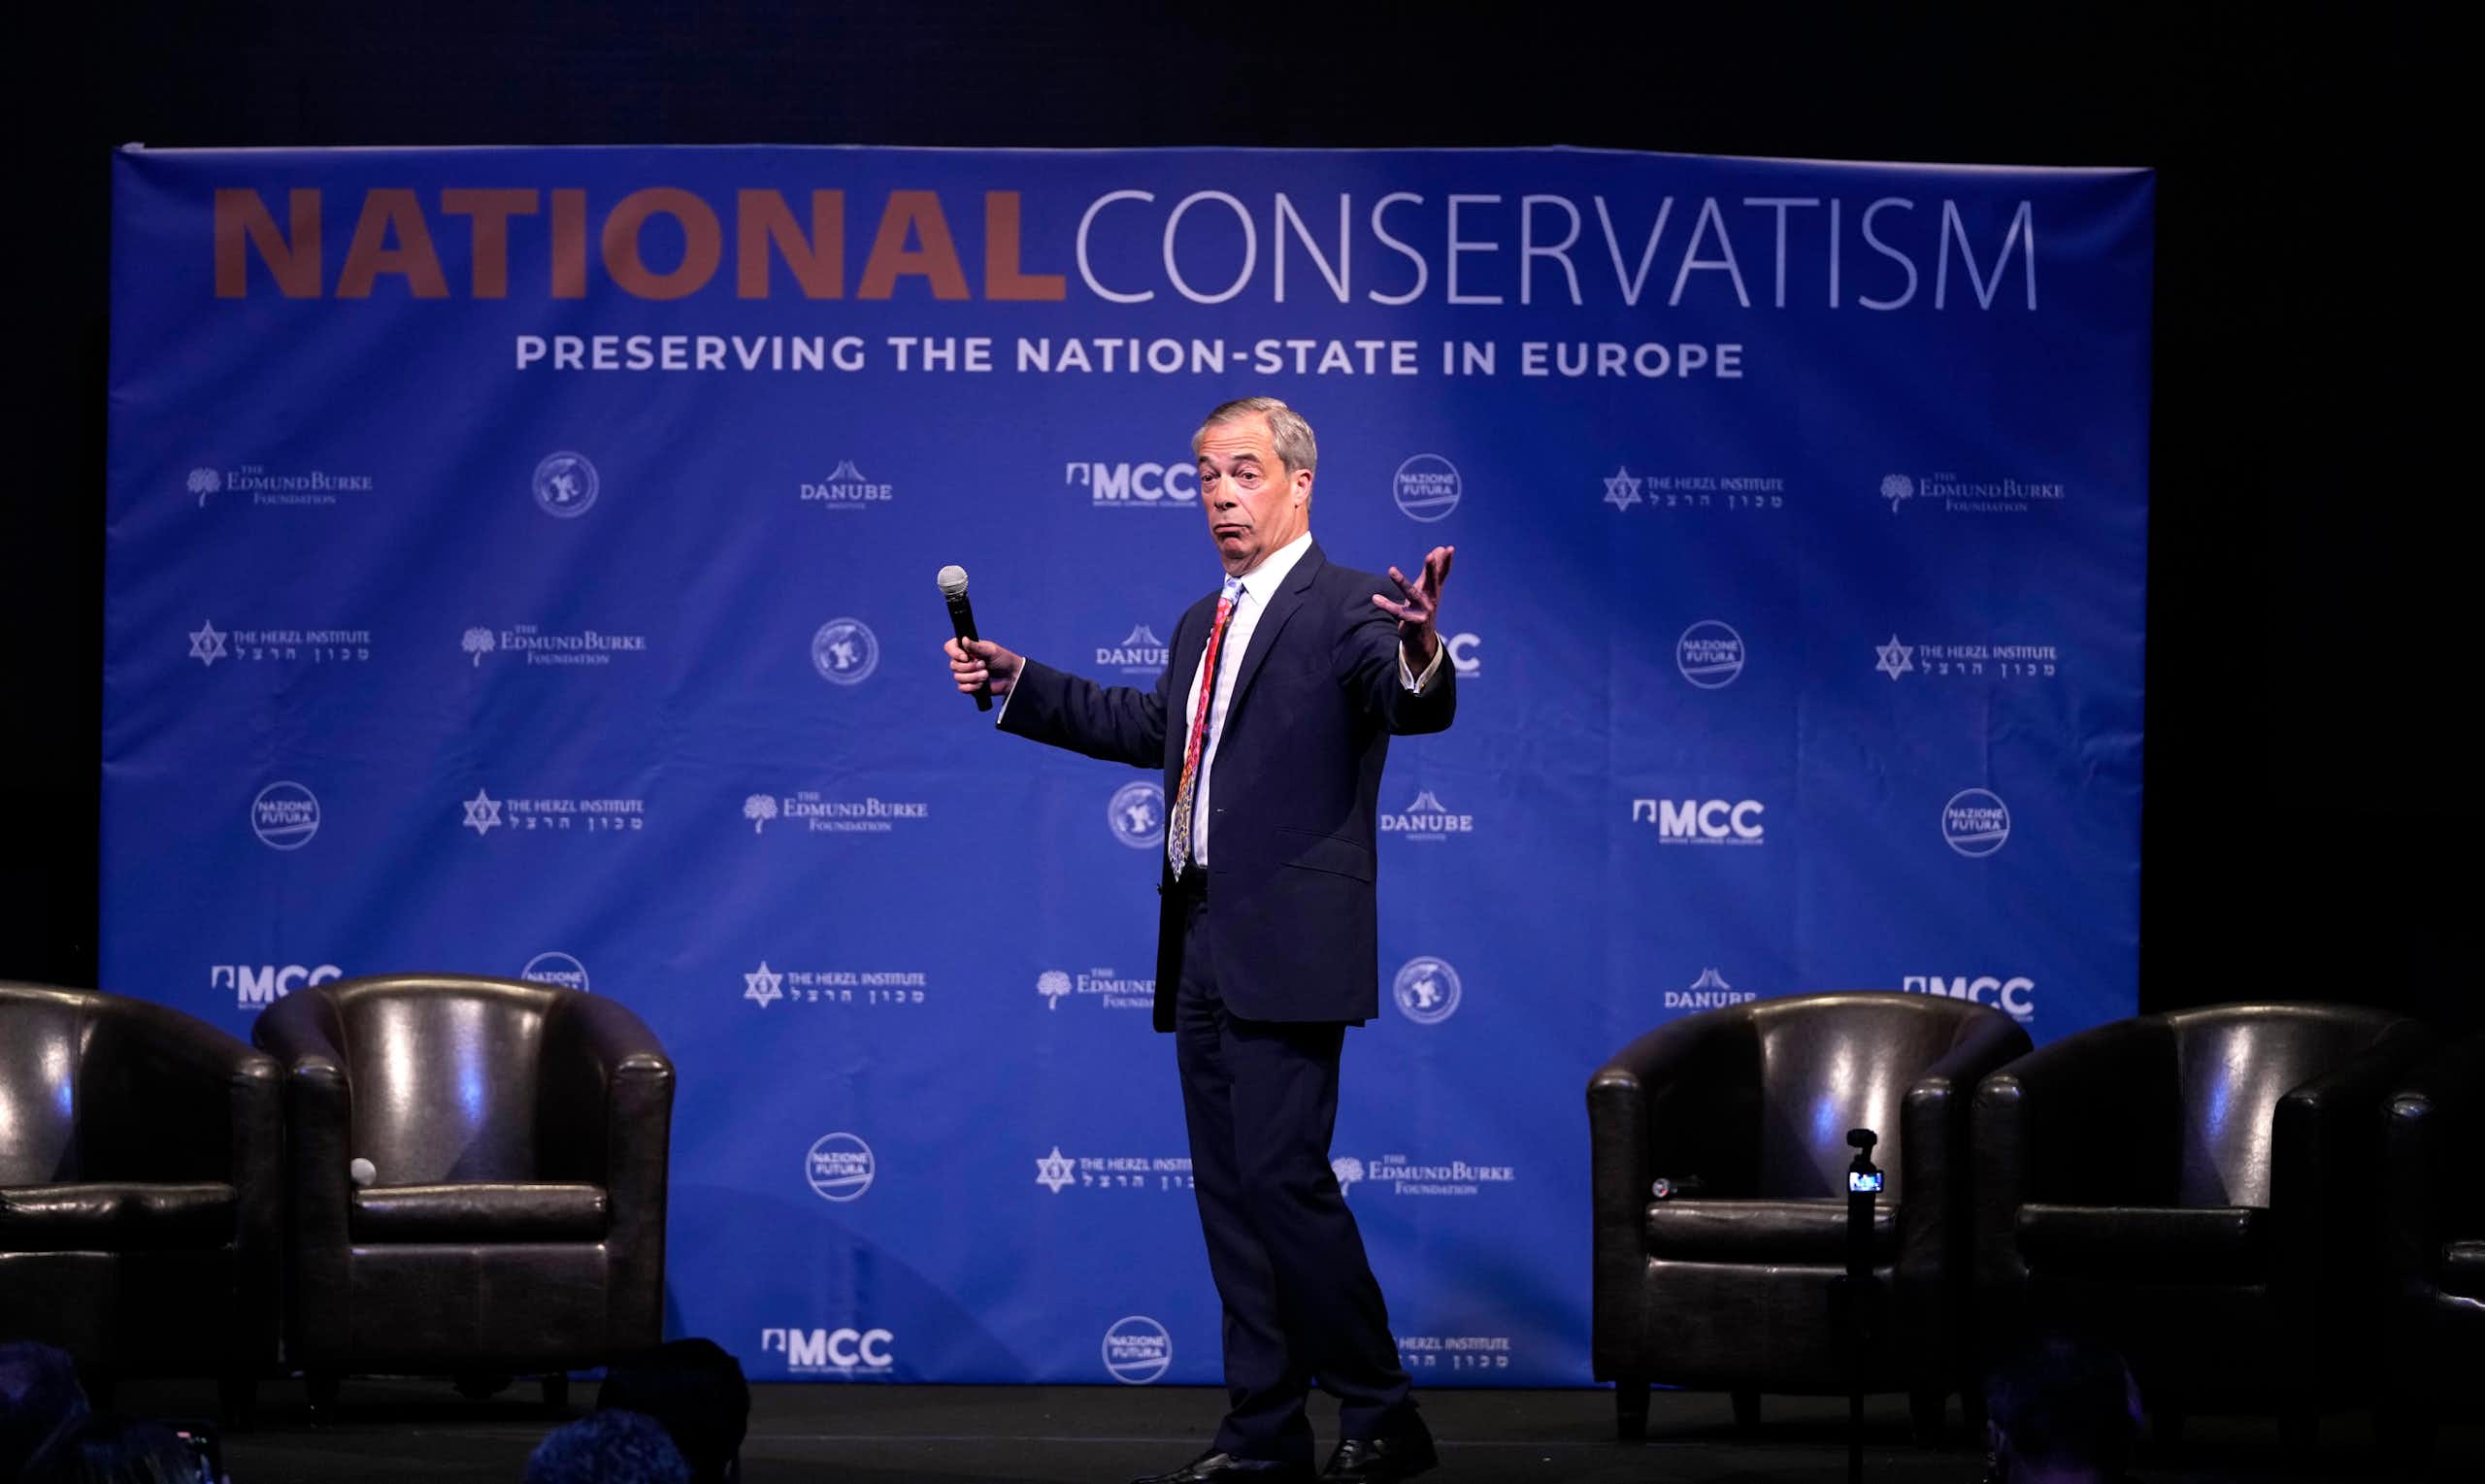 A man on stage with a microphone in his hand gestures as he looks to the audience. A National Conservatism banner is behind him.